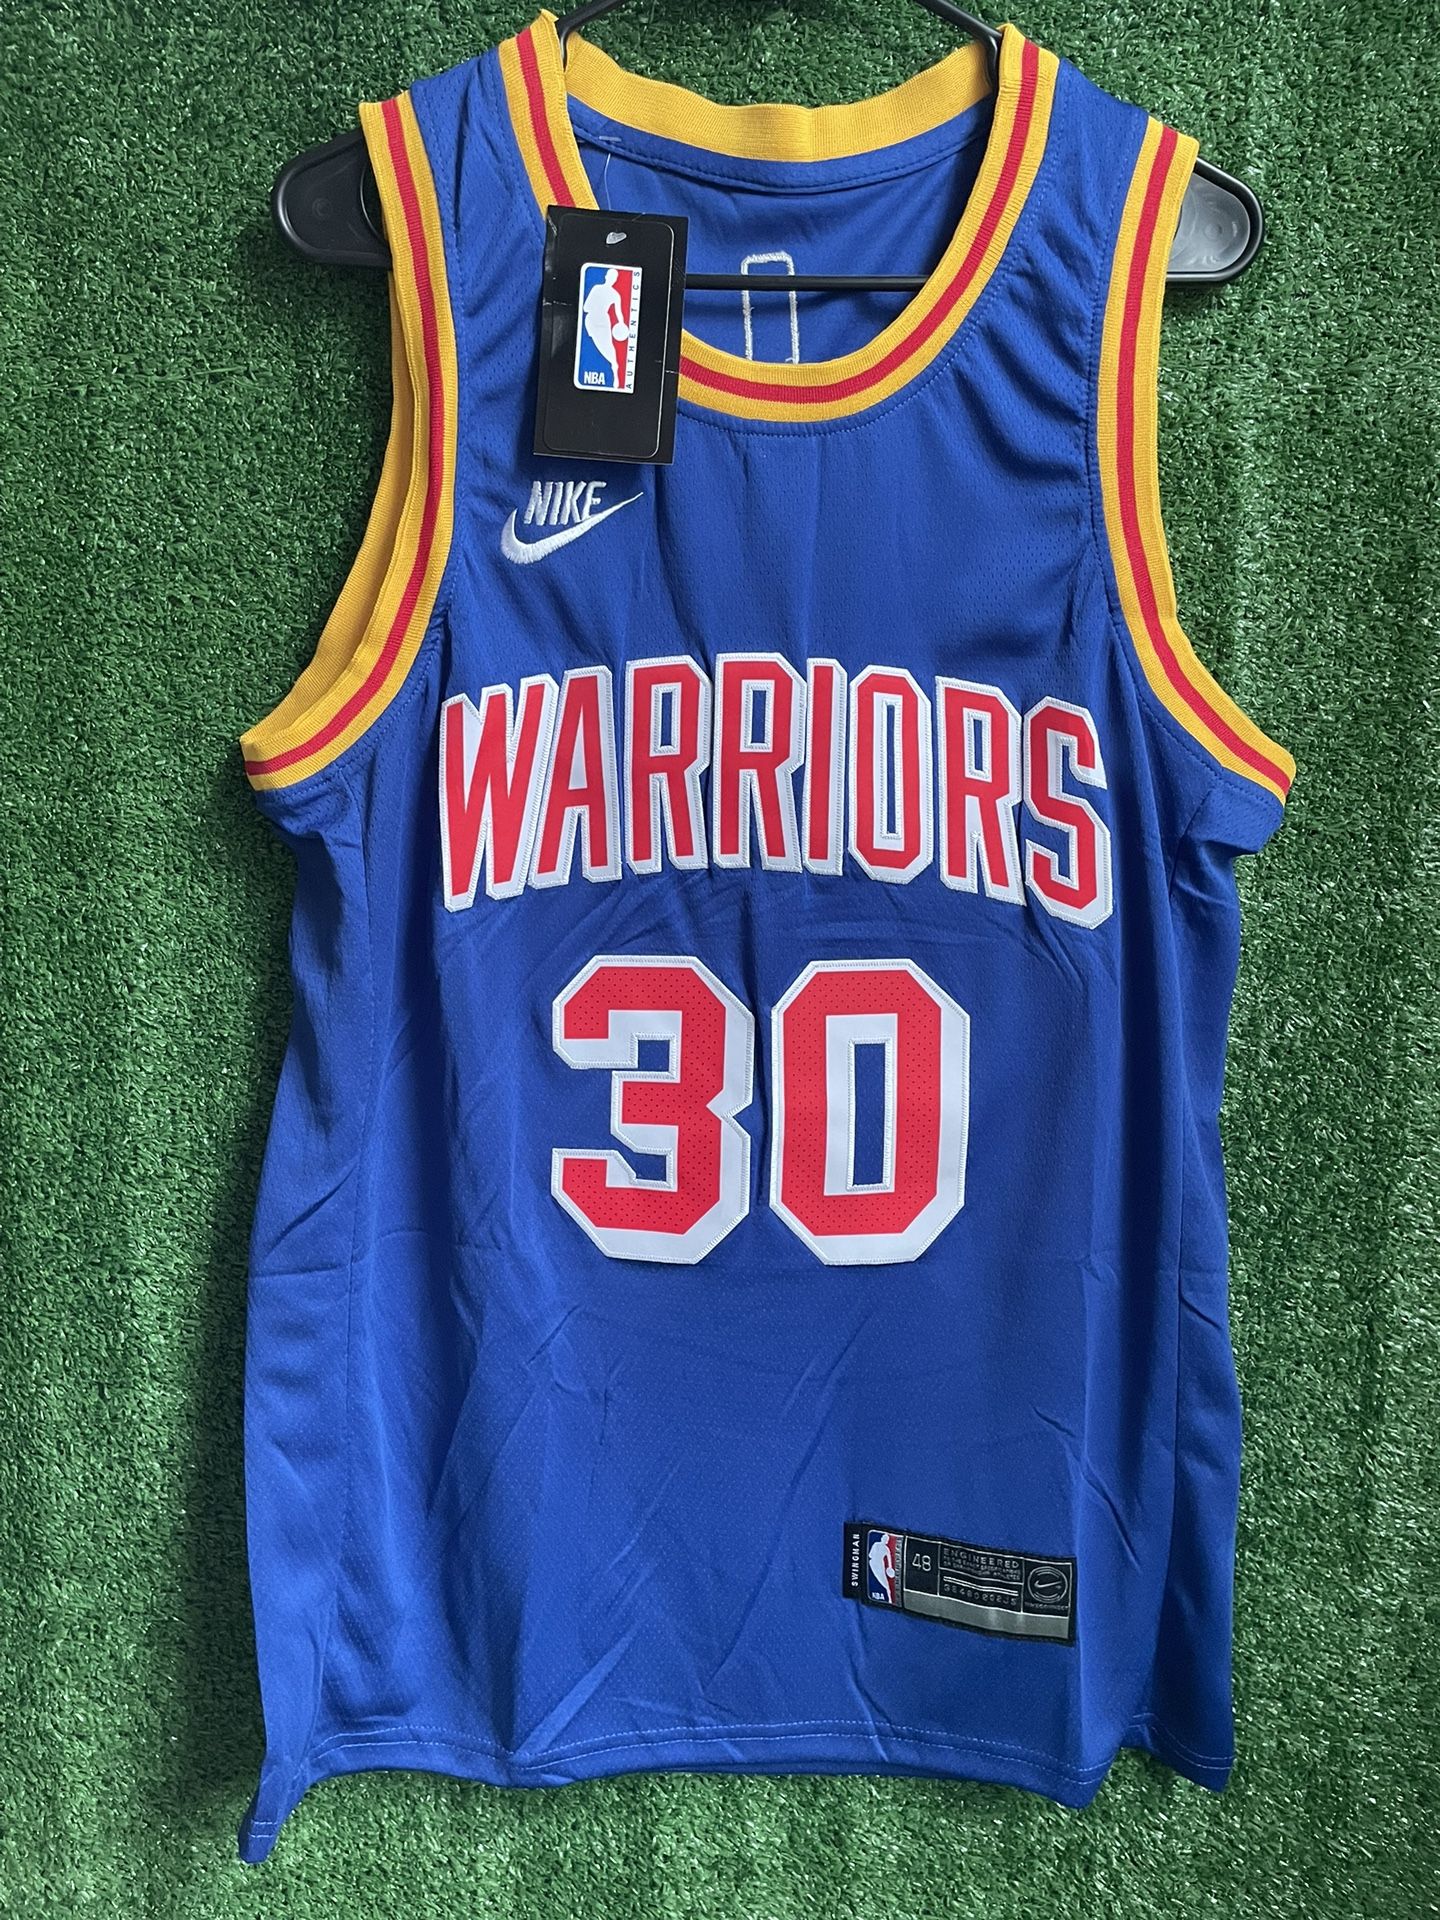 STEPHEN CURRY GOLDEN STATE WARRIORS NIKE JERSEY BRAND NEW WITH TAGS SIZE MEDIUM, LARGE AND XL AVAILABLE 